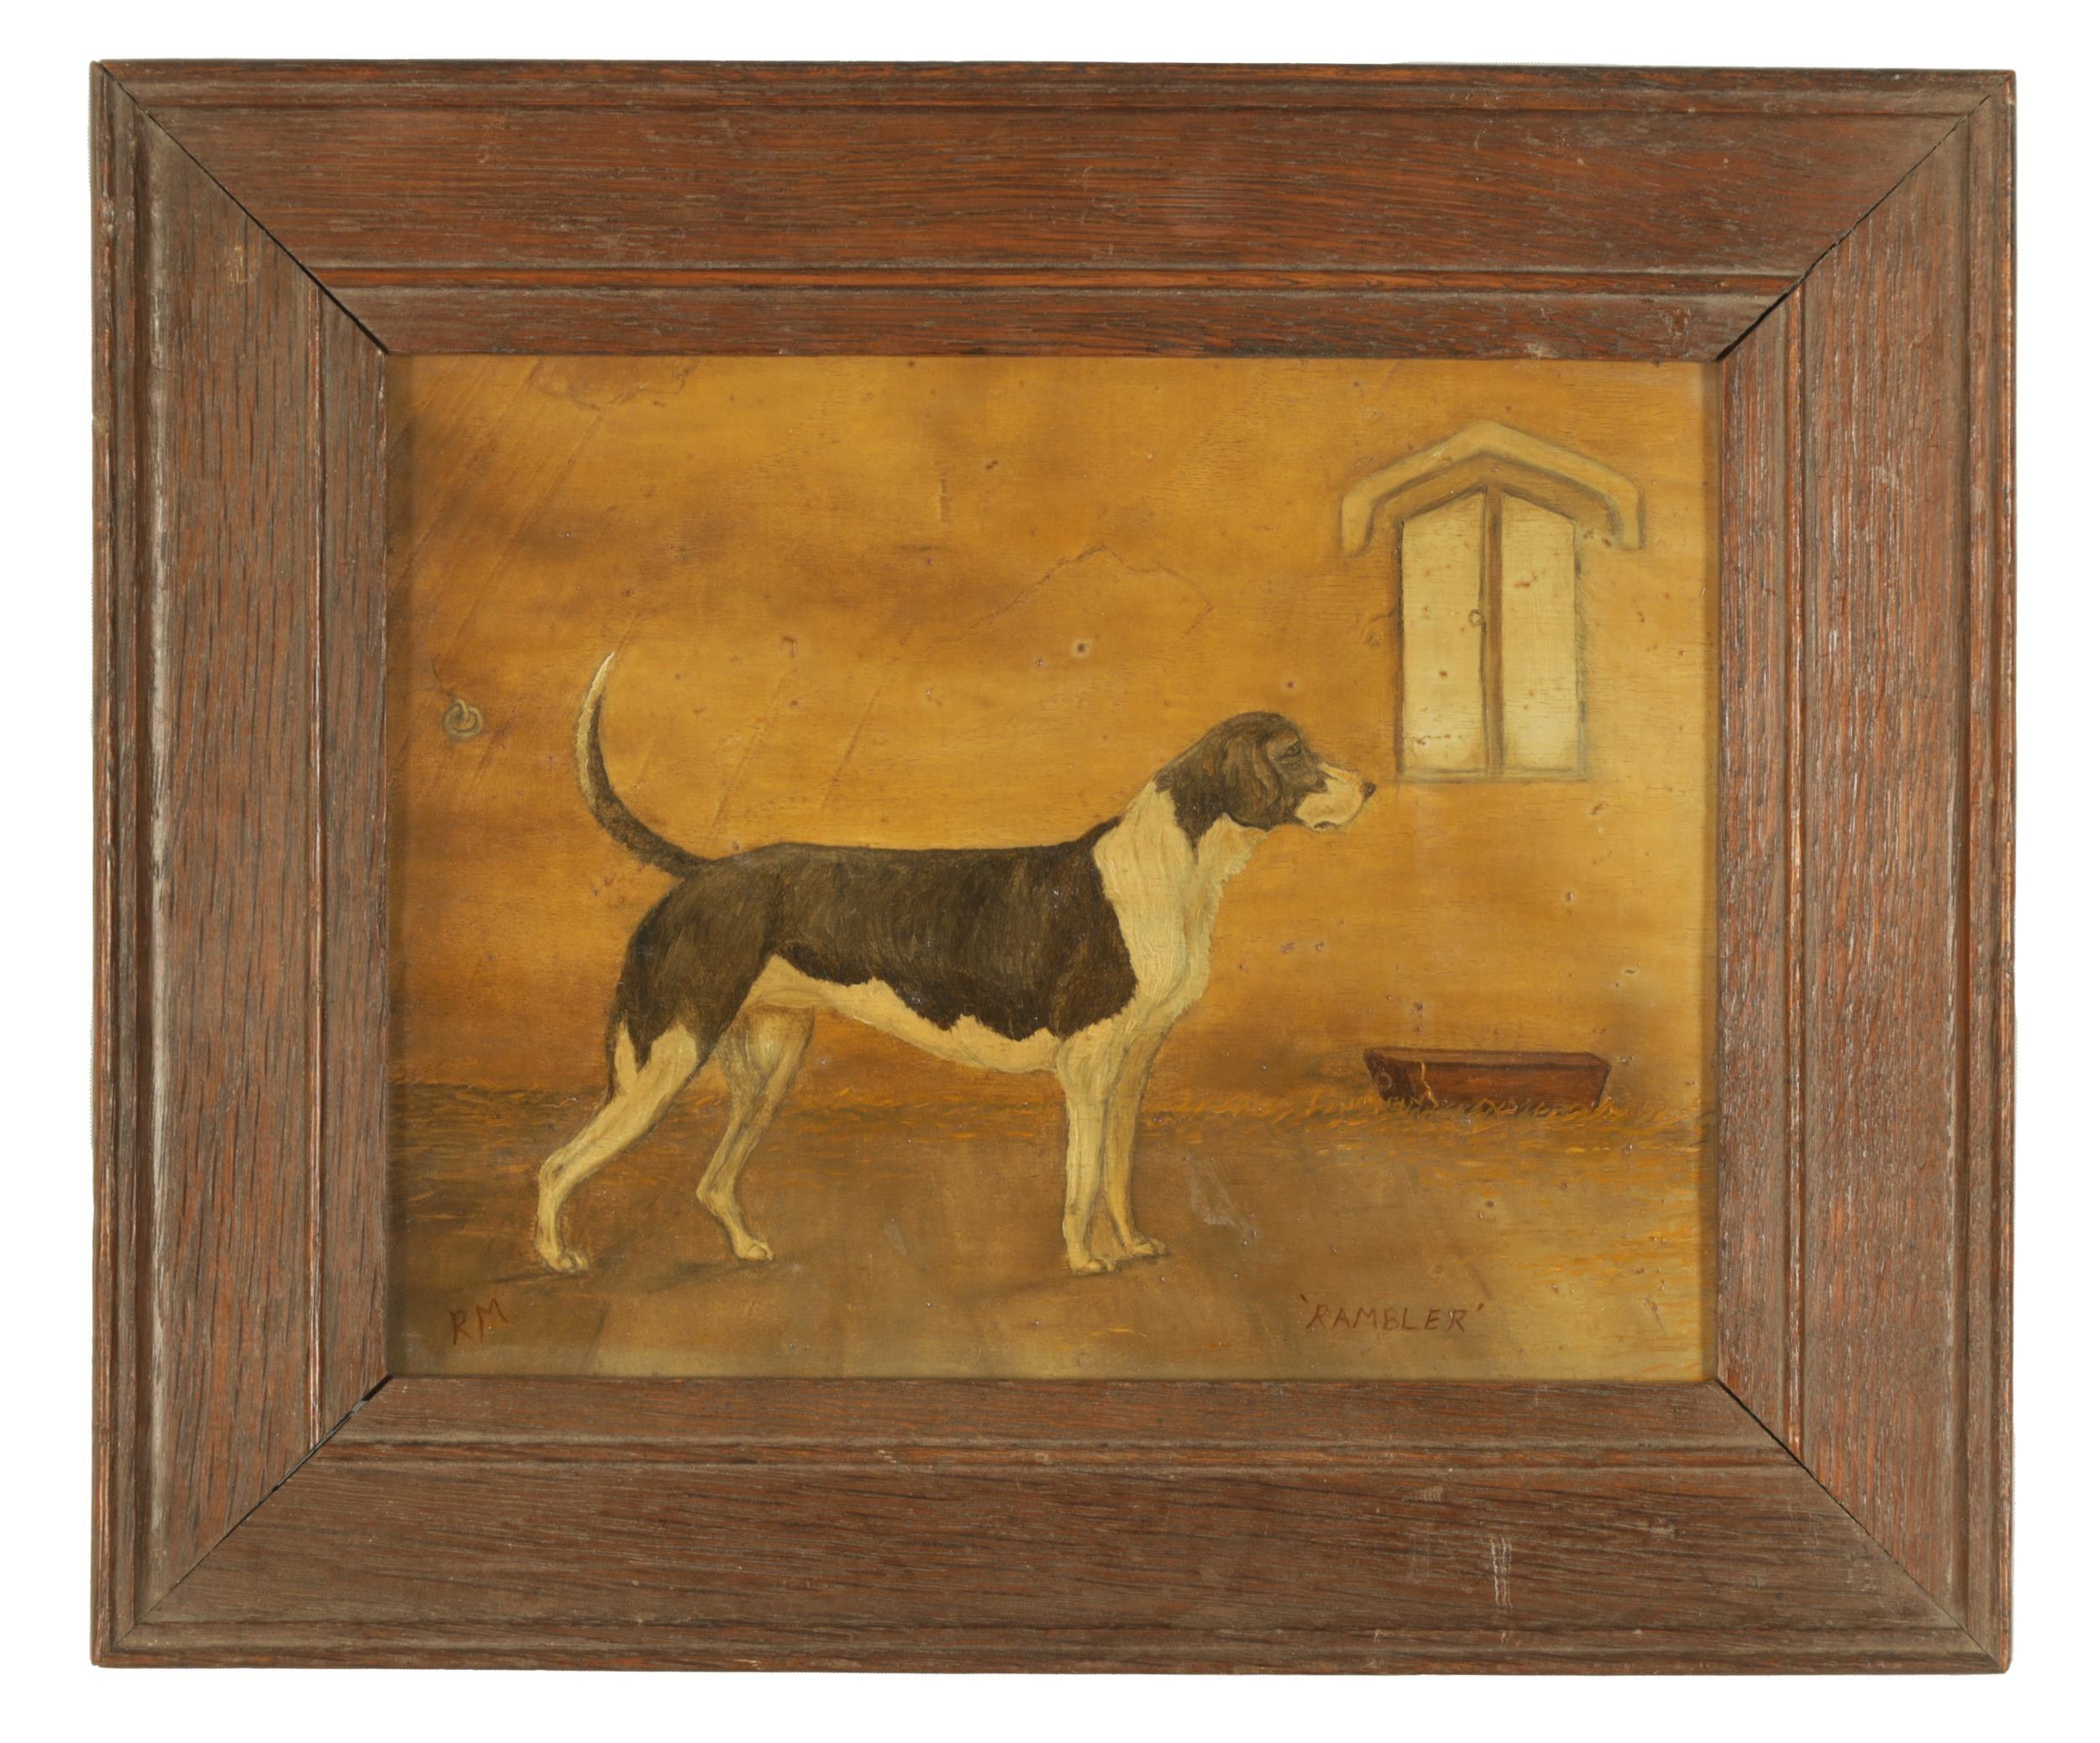 Antique British Interior Painting - Antique English Primitive Dog Oil Painting - Hound in a Stable Interior, signed